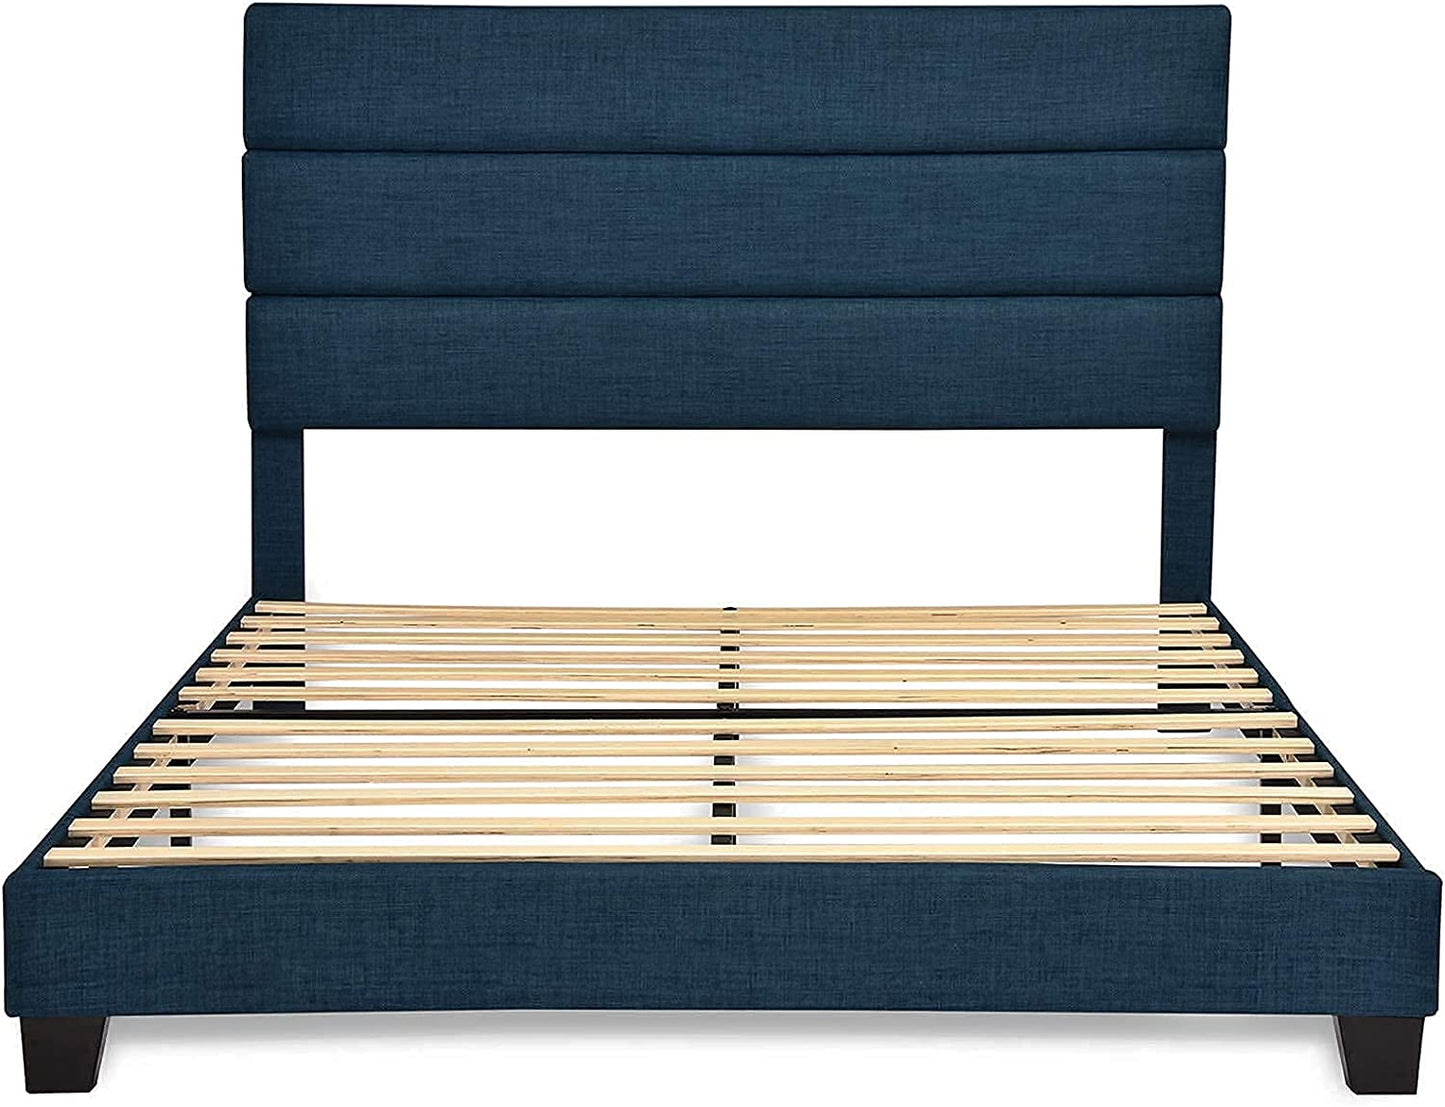 Allewie King Size Fabric Fully Upholstered Platform Bed Frame with Headboard and Strong Wooden Slats, Navy Blue